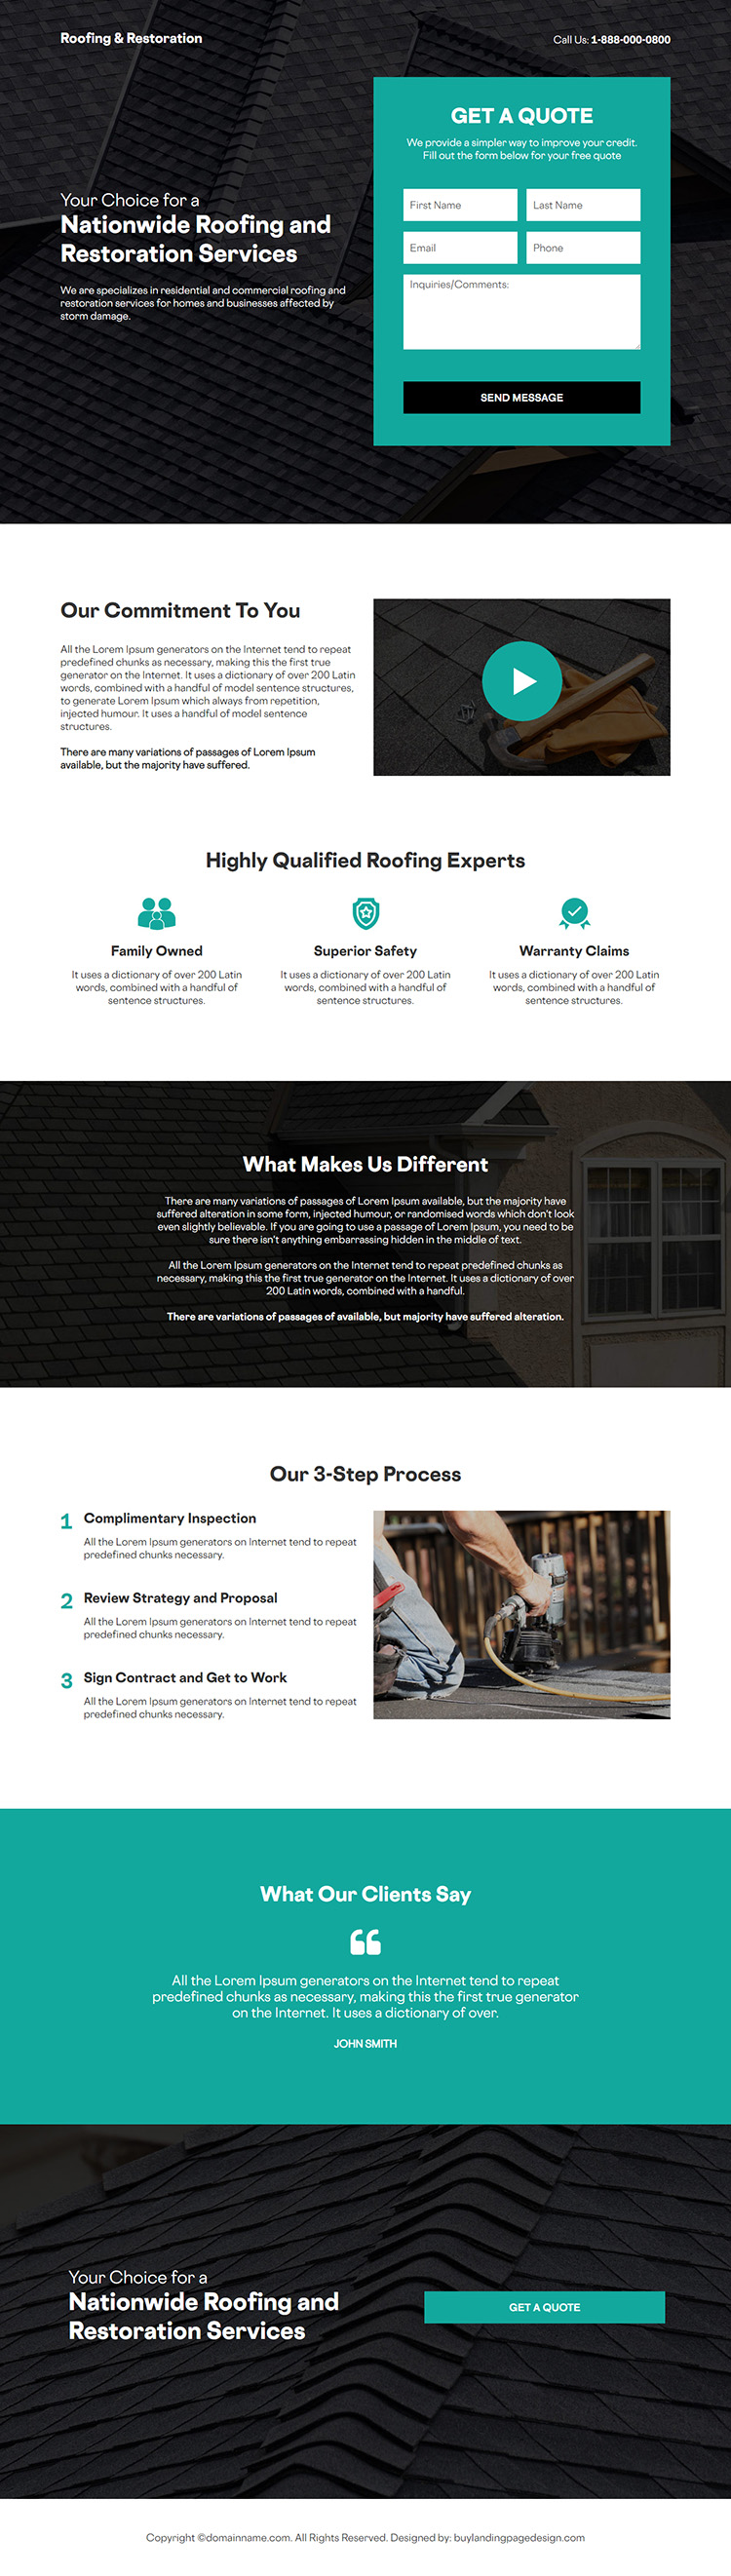 roofing and restoration experts responsive landing page design